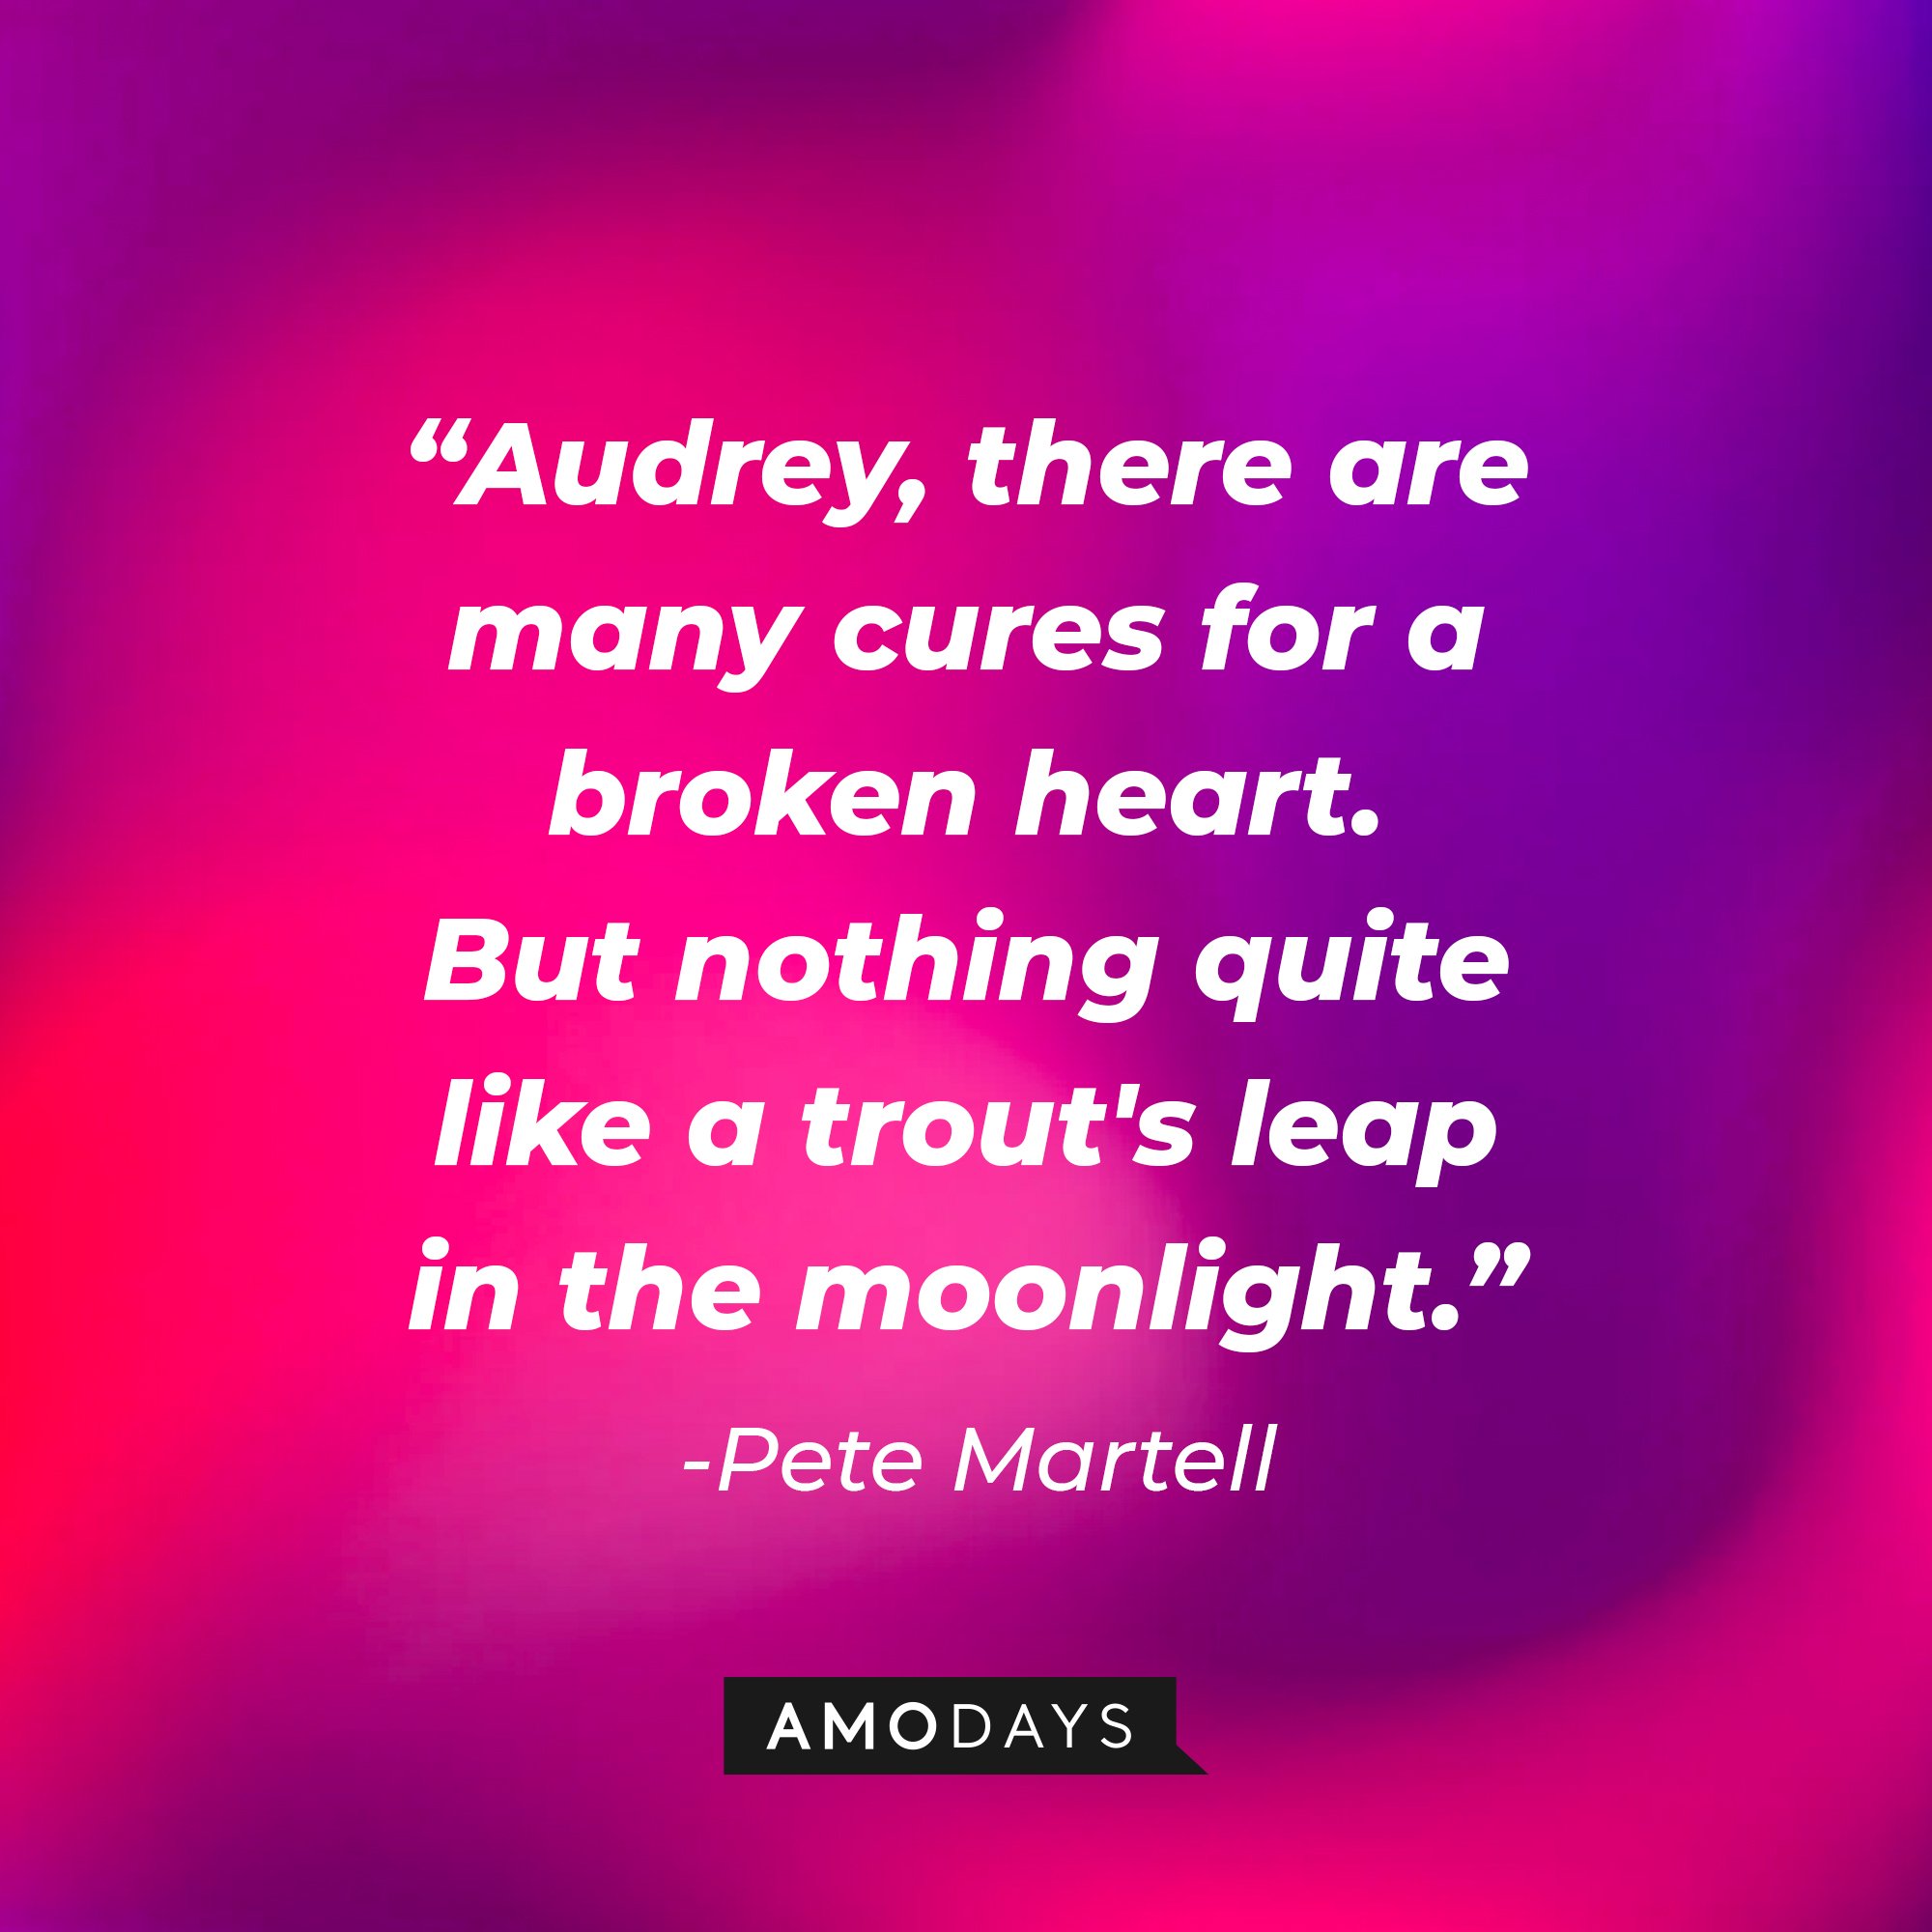 Pete Martell’s quote: "Audrey, there are many cures for a broken heart. But nothing quite like a trout's leap in the moonlight." | Image: AmoDays